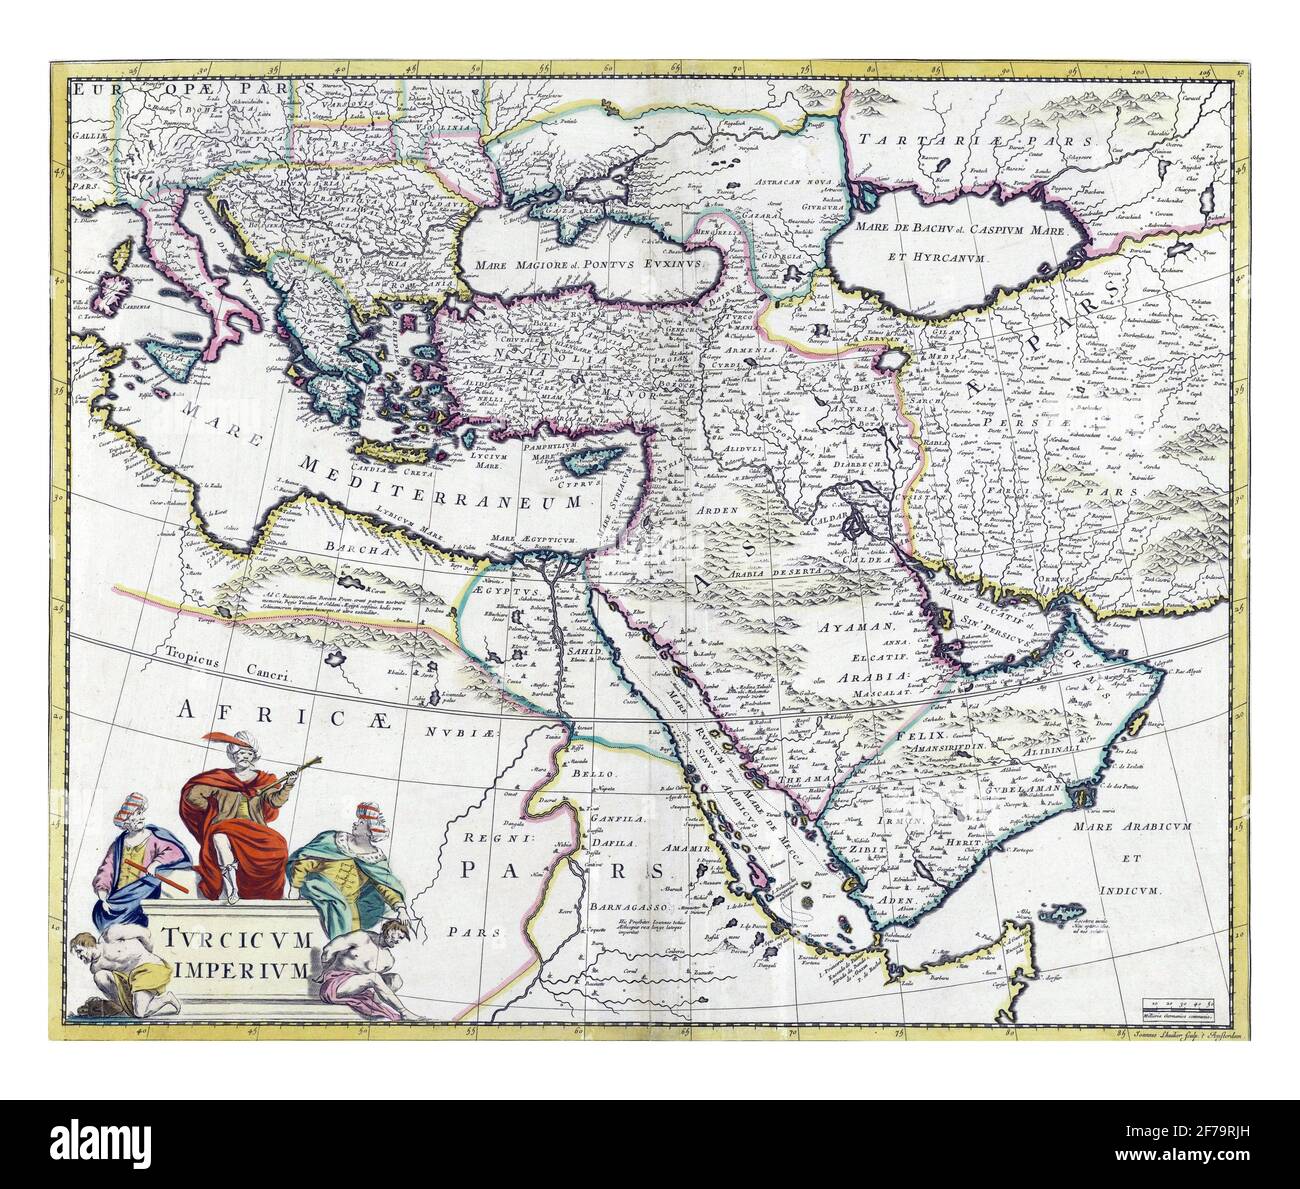 Map of the Turkish Empire, vintage engraving. Stock Photo